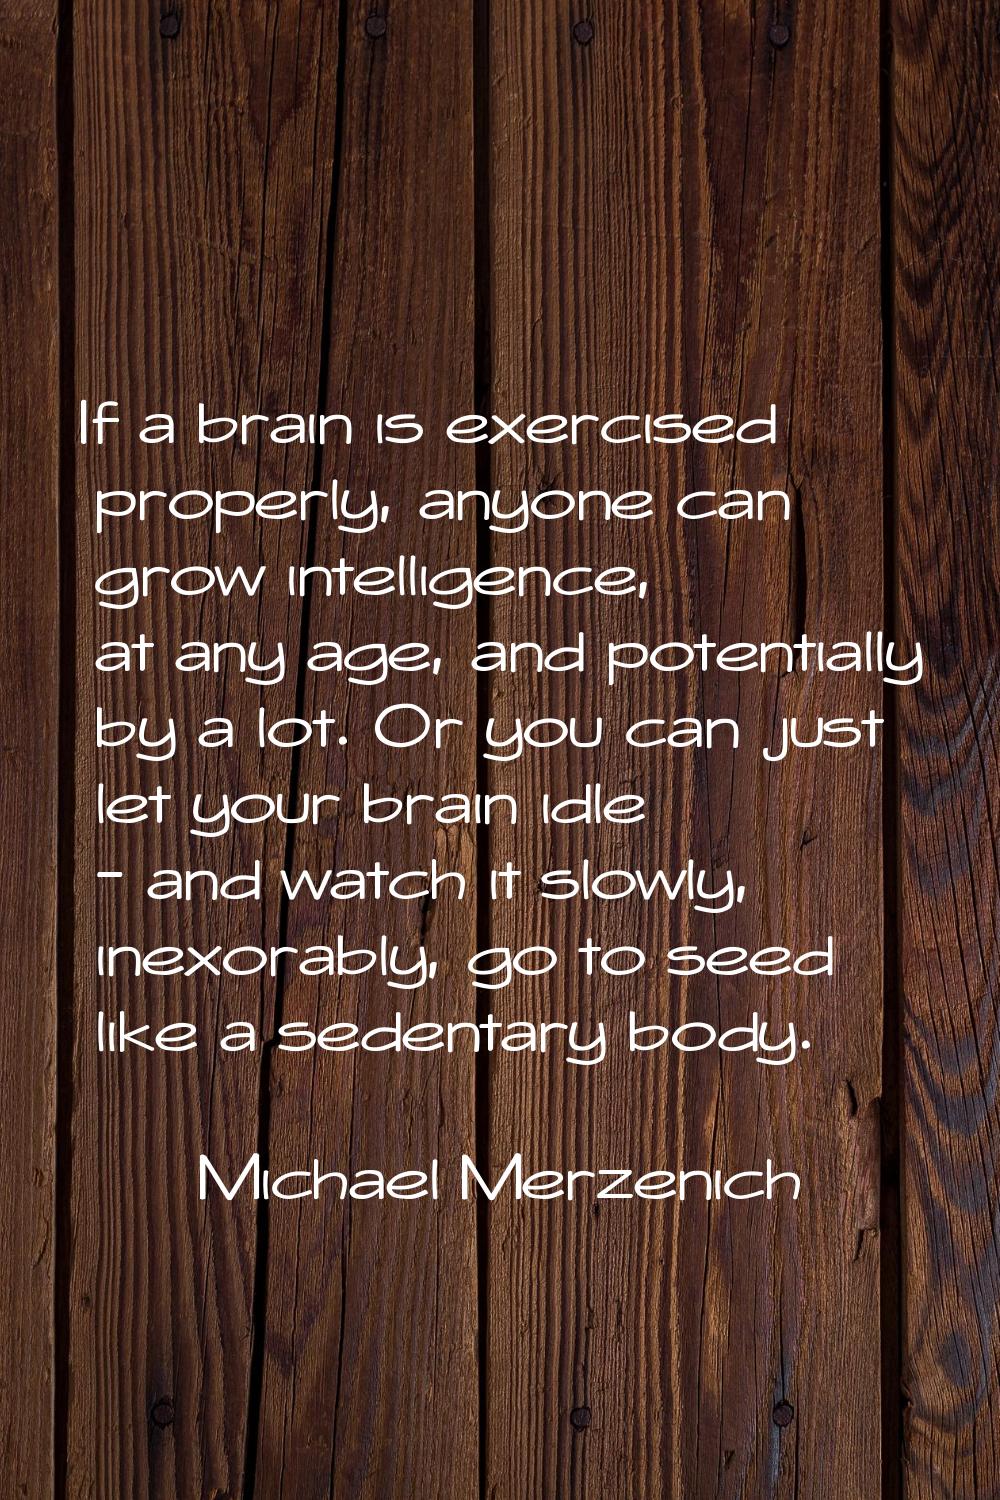 If a brain is exercised properly, anyone can grow intelligence, at any age, and potentially by a lo